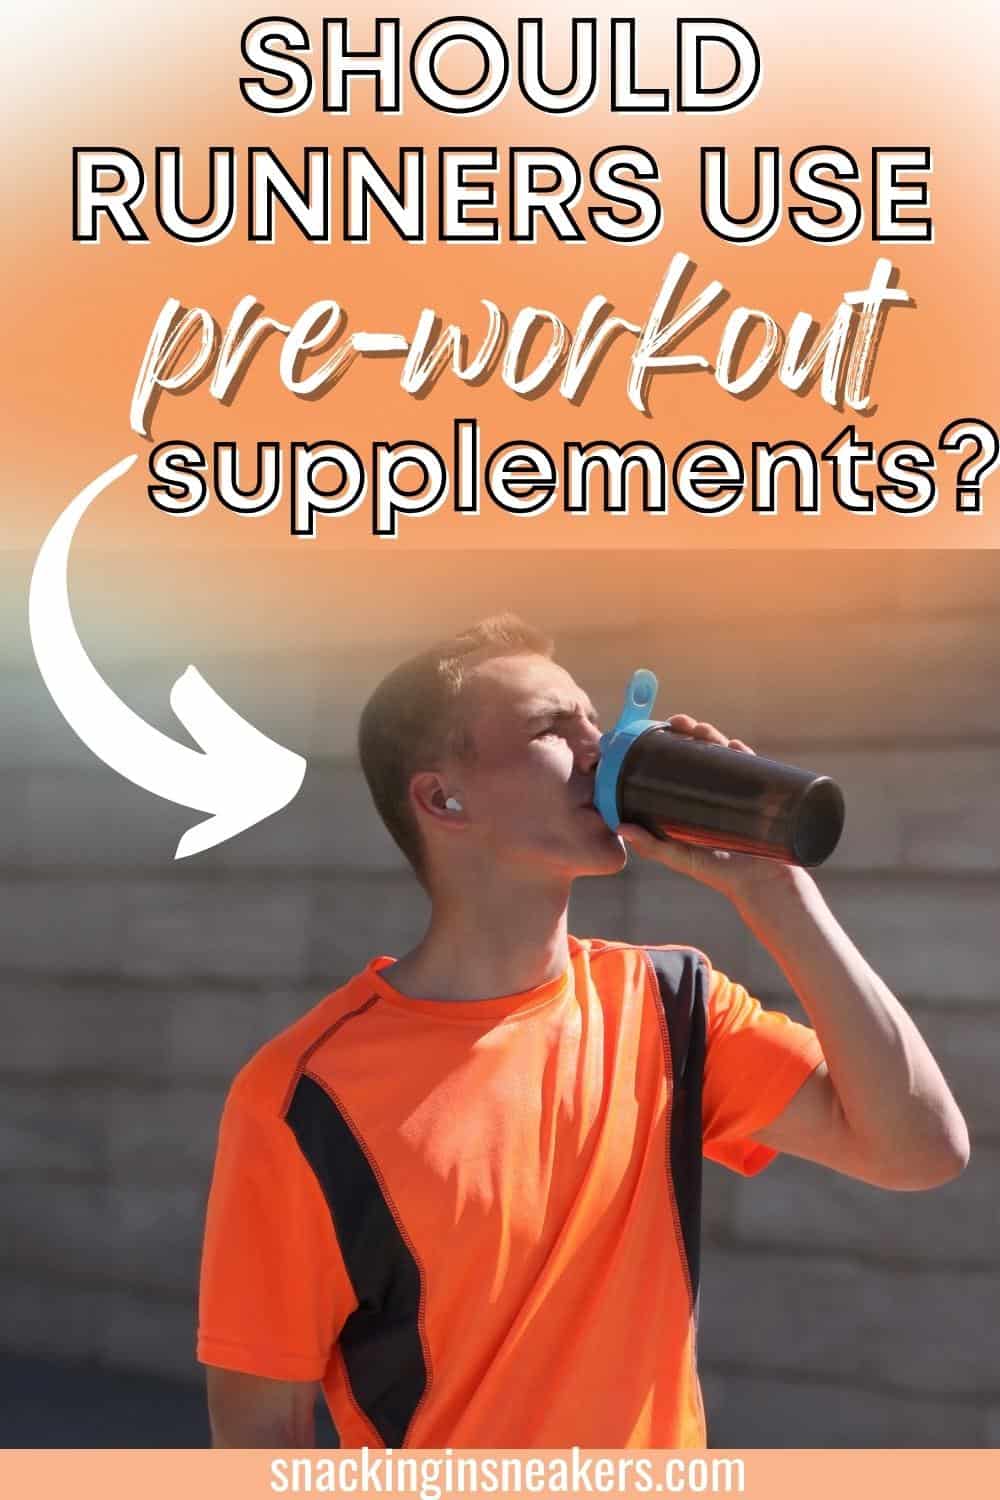 A man drinking a pre-workout supplement before a run, with a text overlay that says should runners use pre-workout supplements.